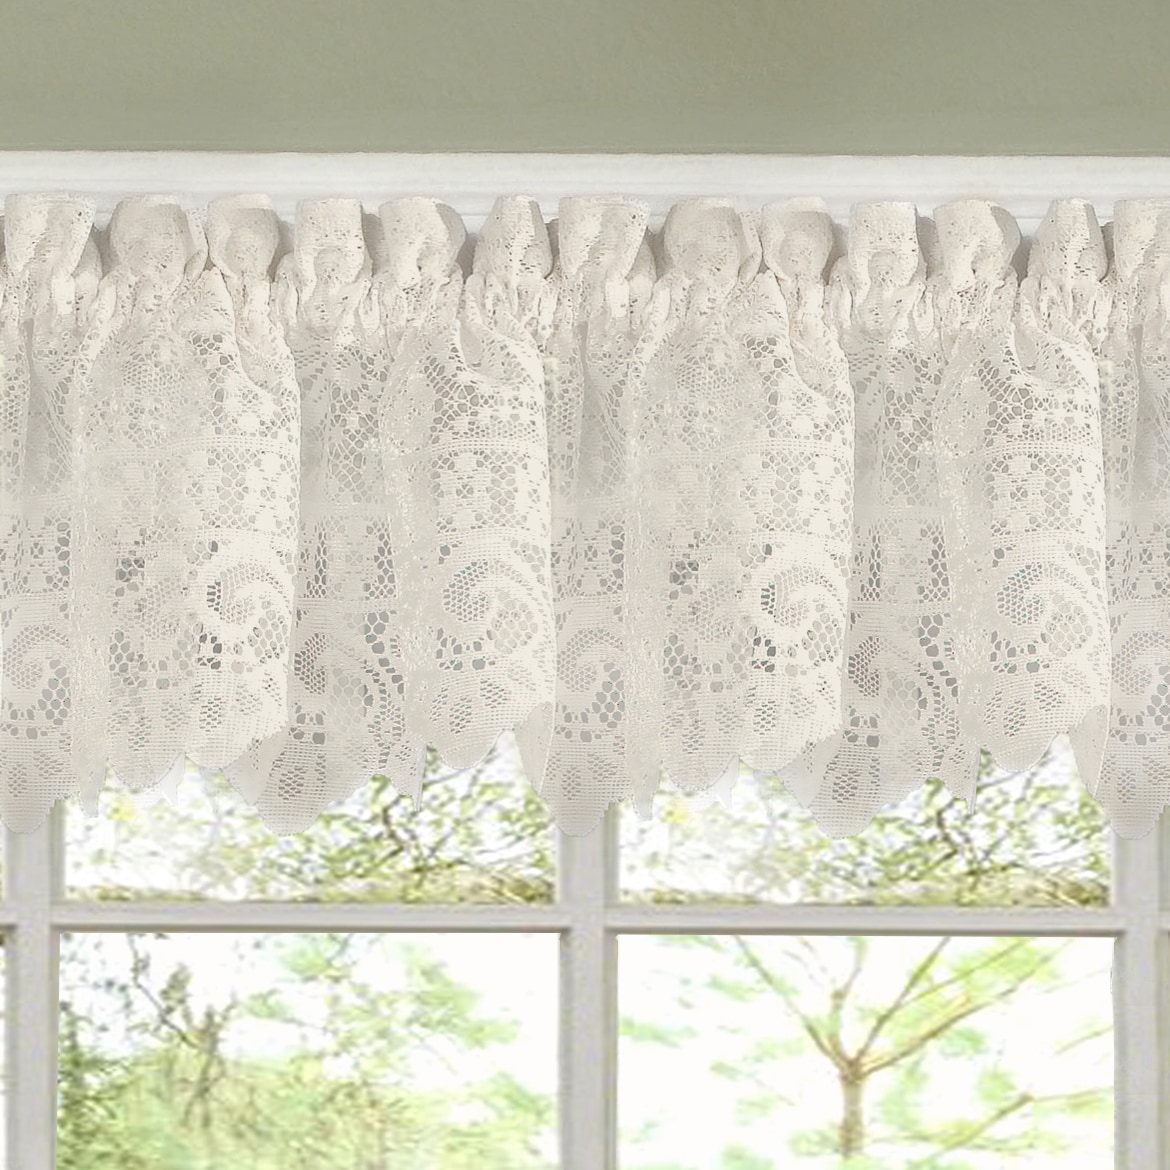 Luxurious Old World Style Lace Kitchen Curtains Tiers And Valances In Cream Overstock 10050988